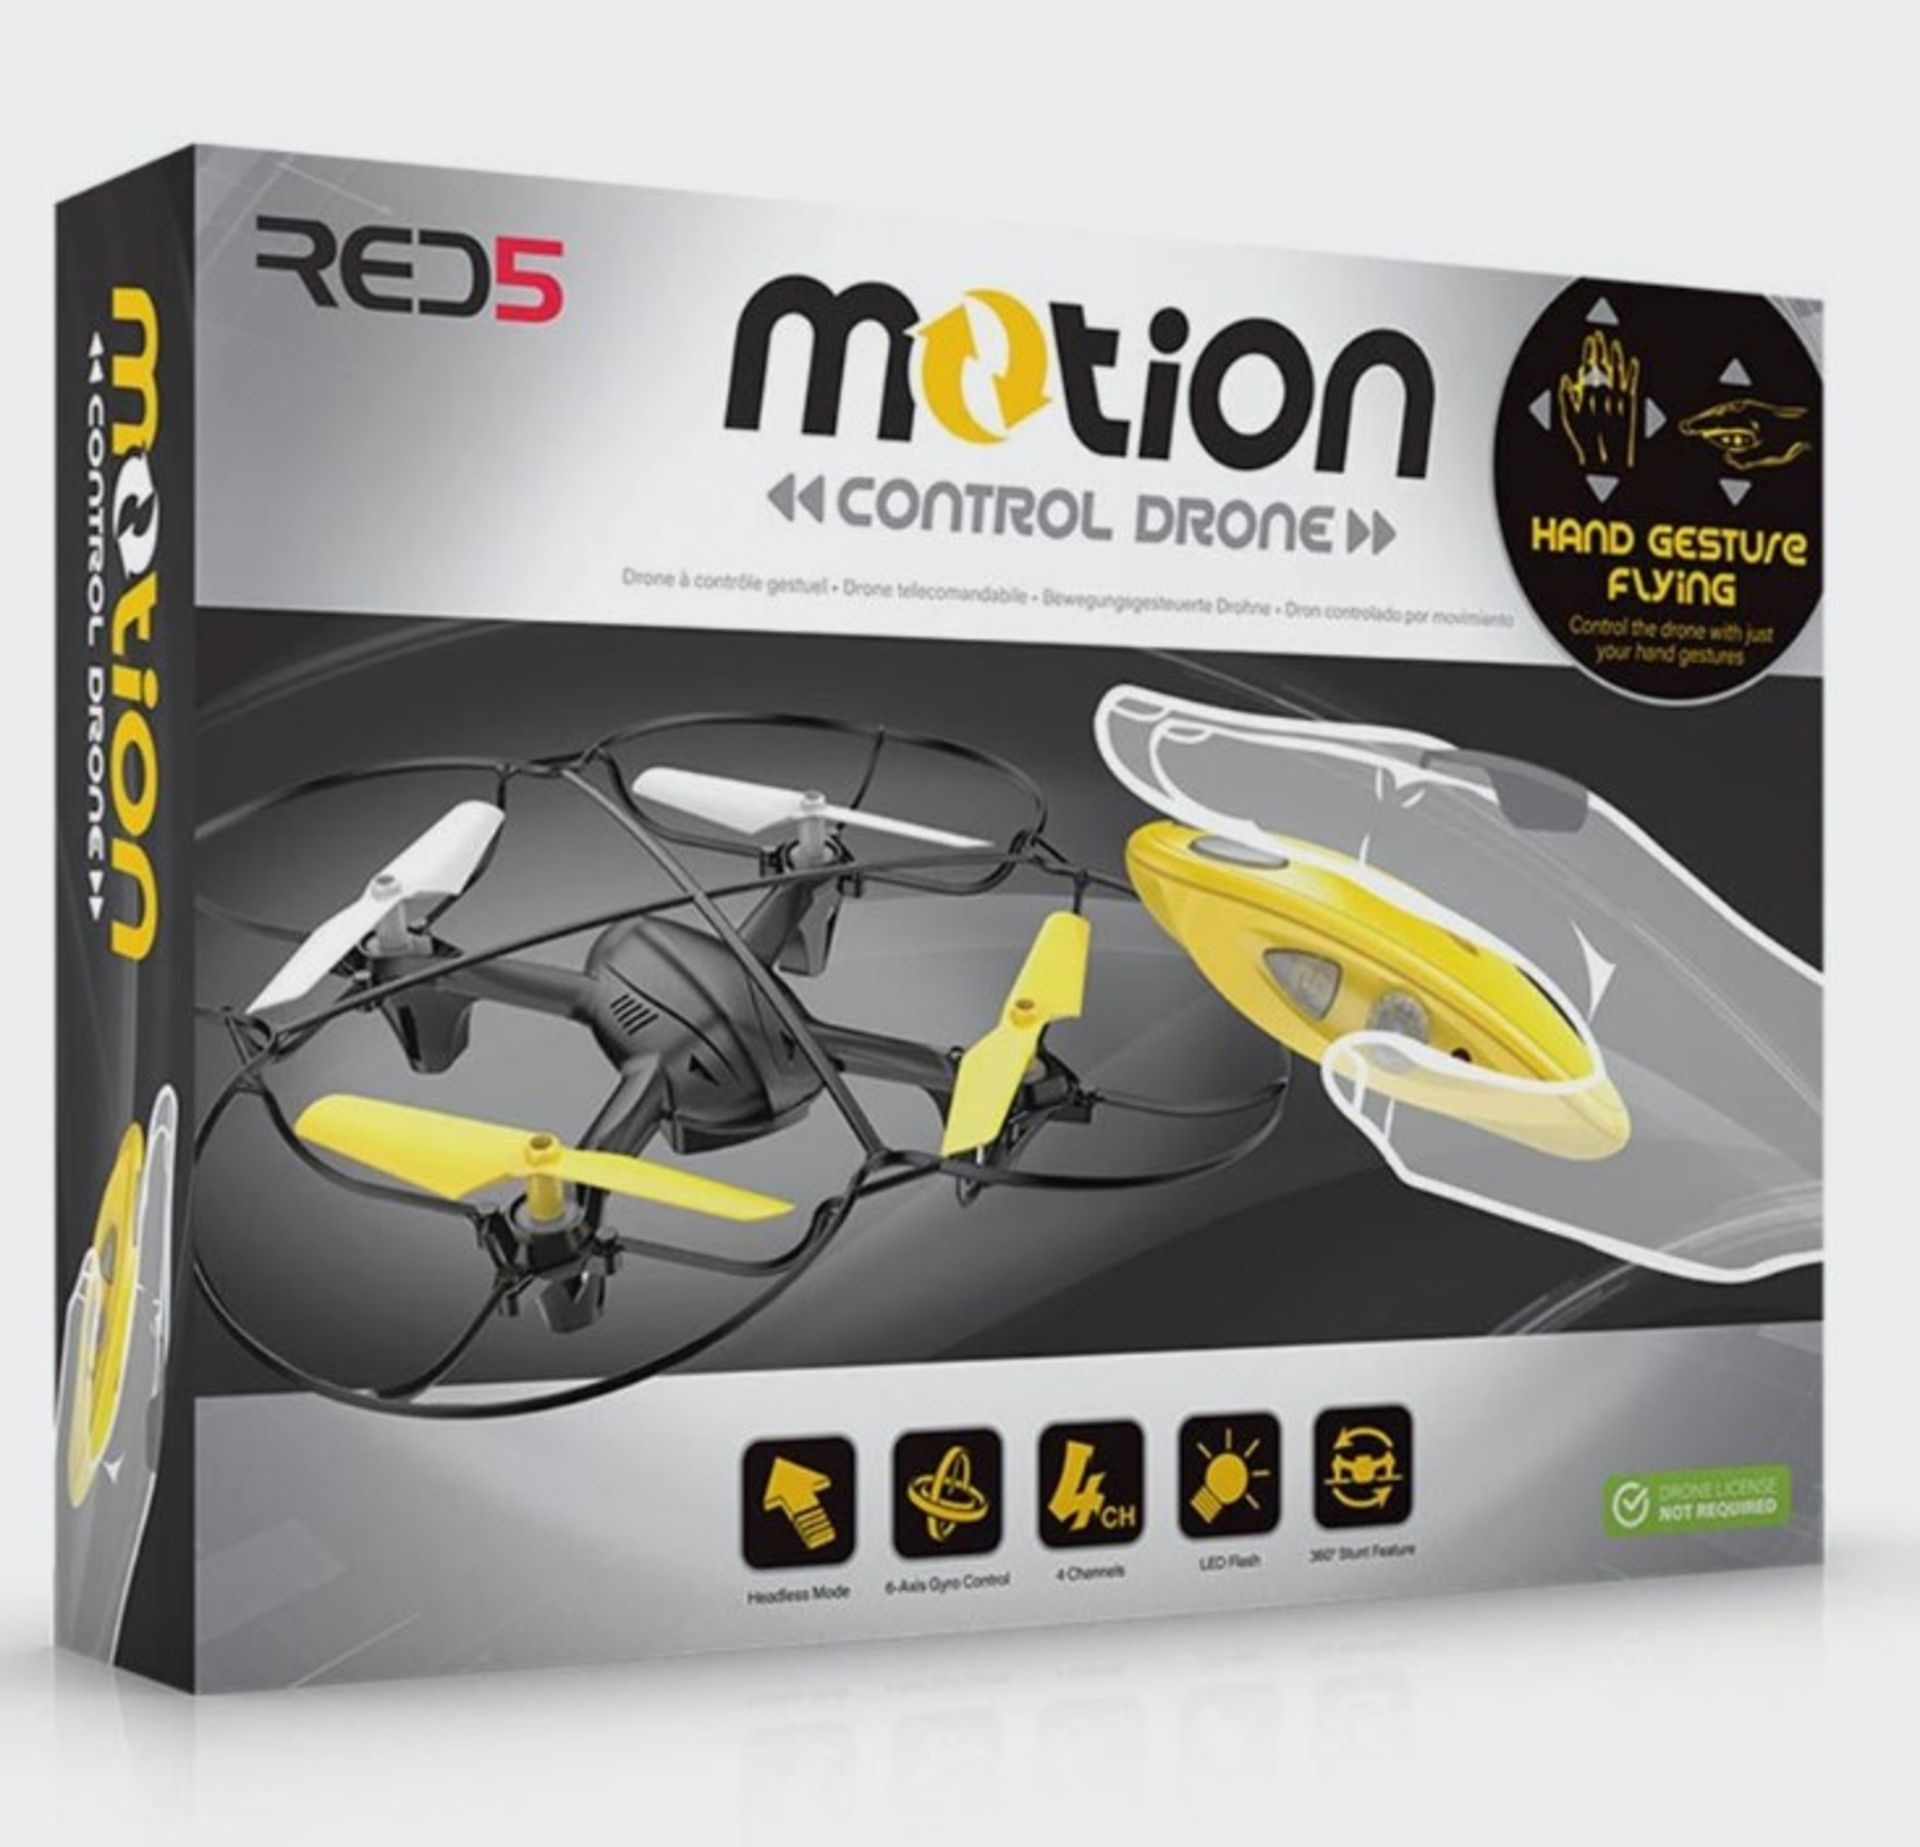 (7J) Lot RRP £600. 20x Red5 Motion Control Drone (Yellow/Black) RRP £30 Each. (Units Have Return T